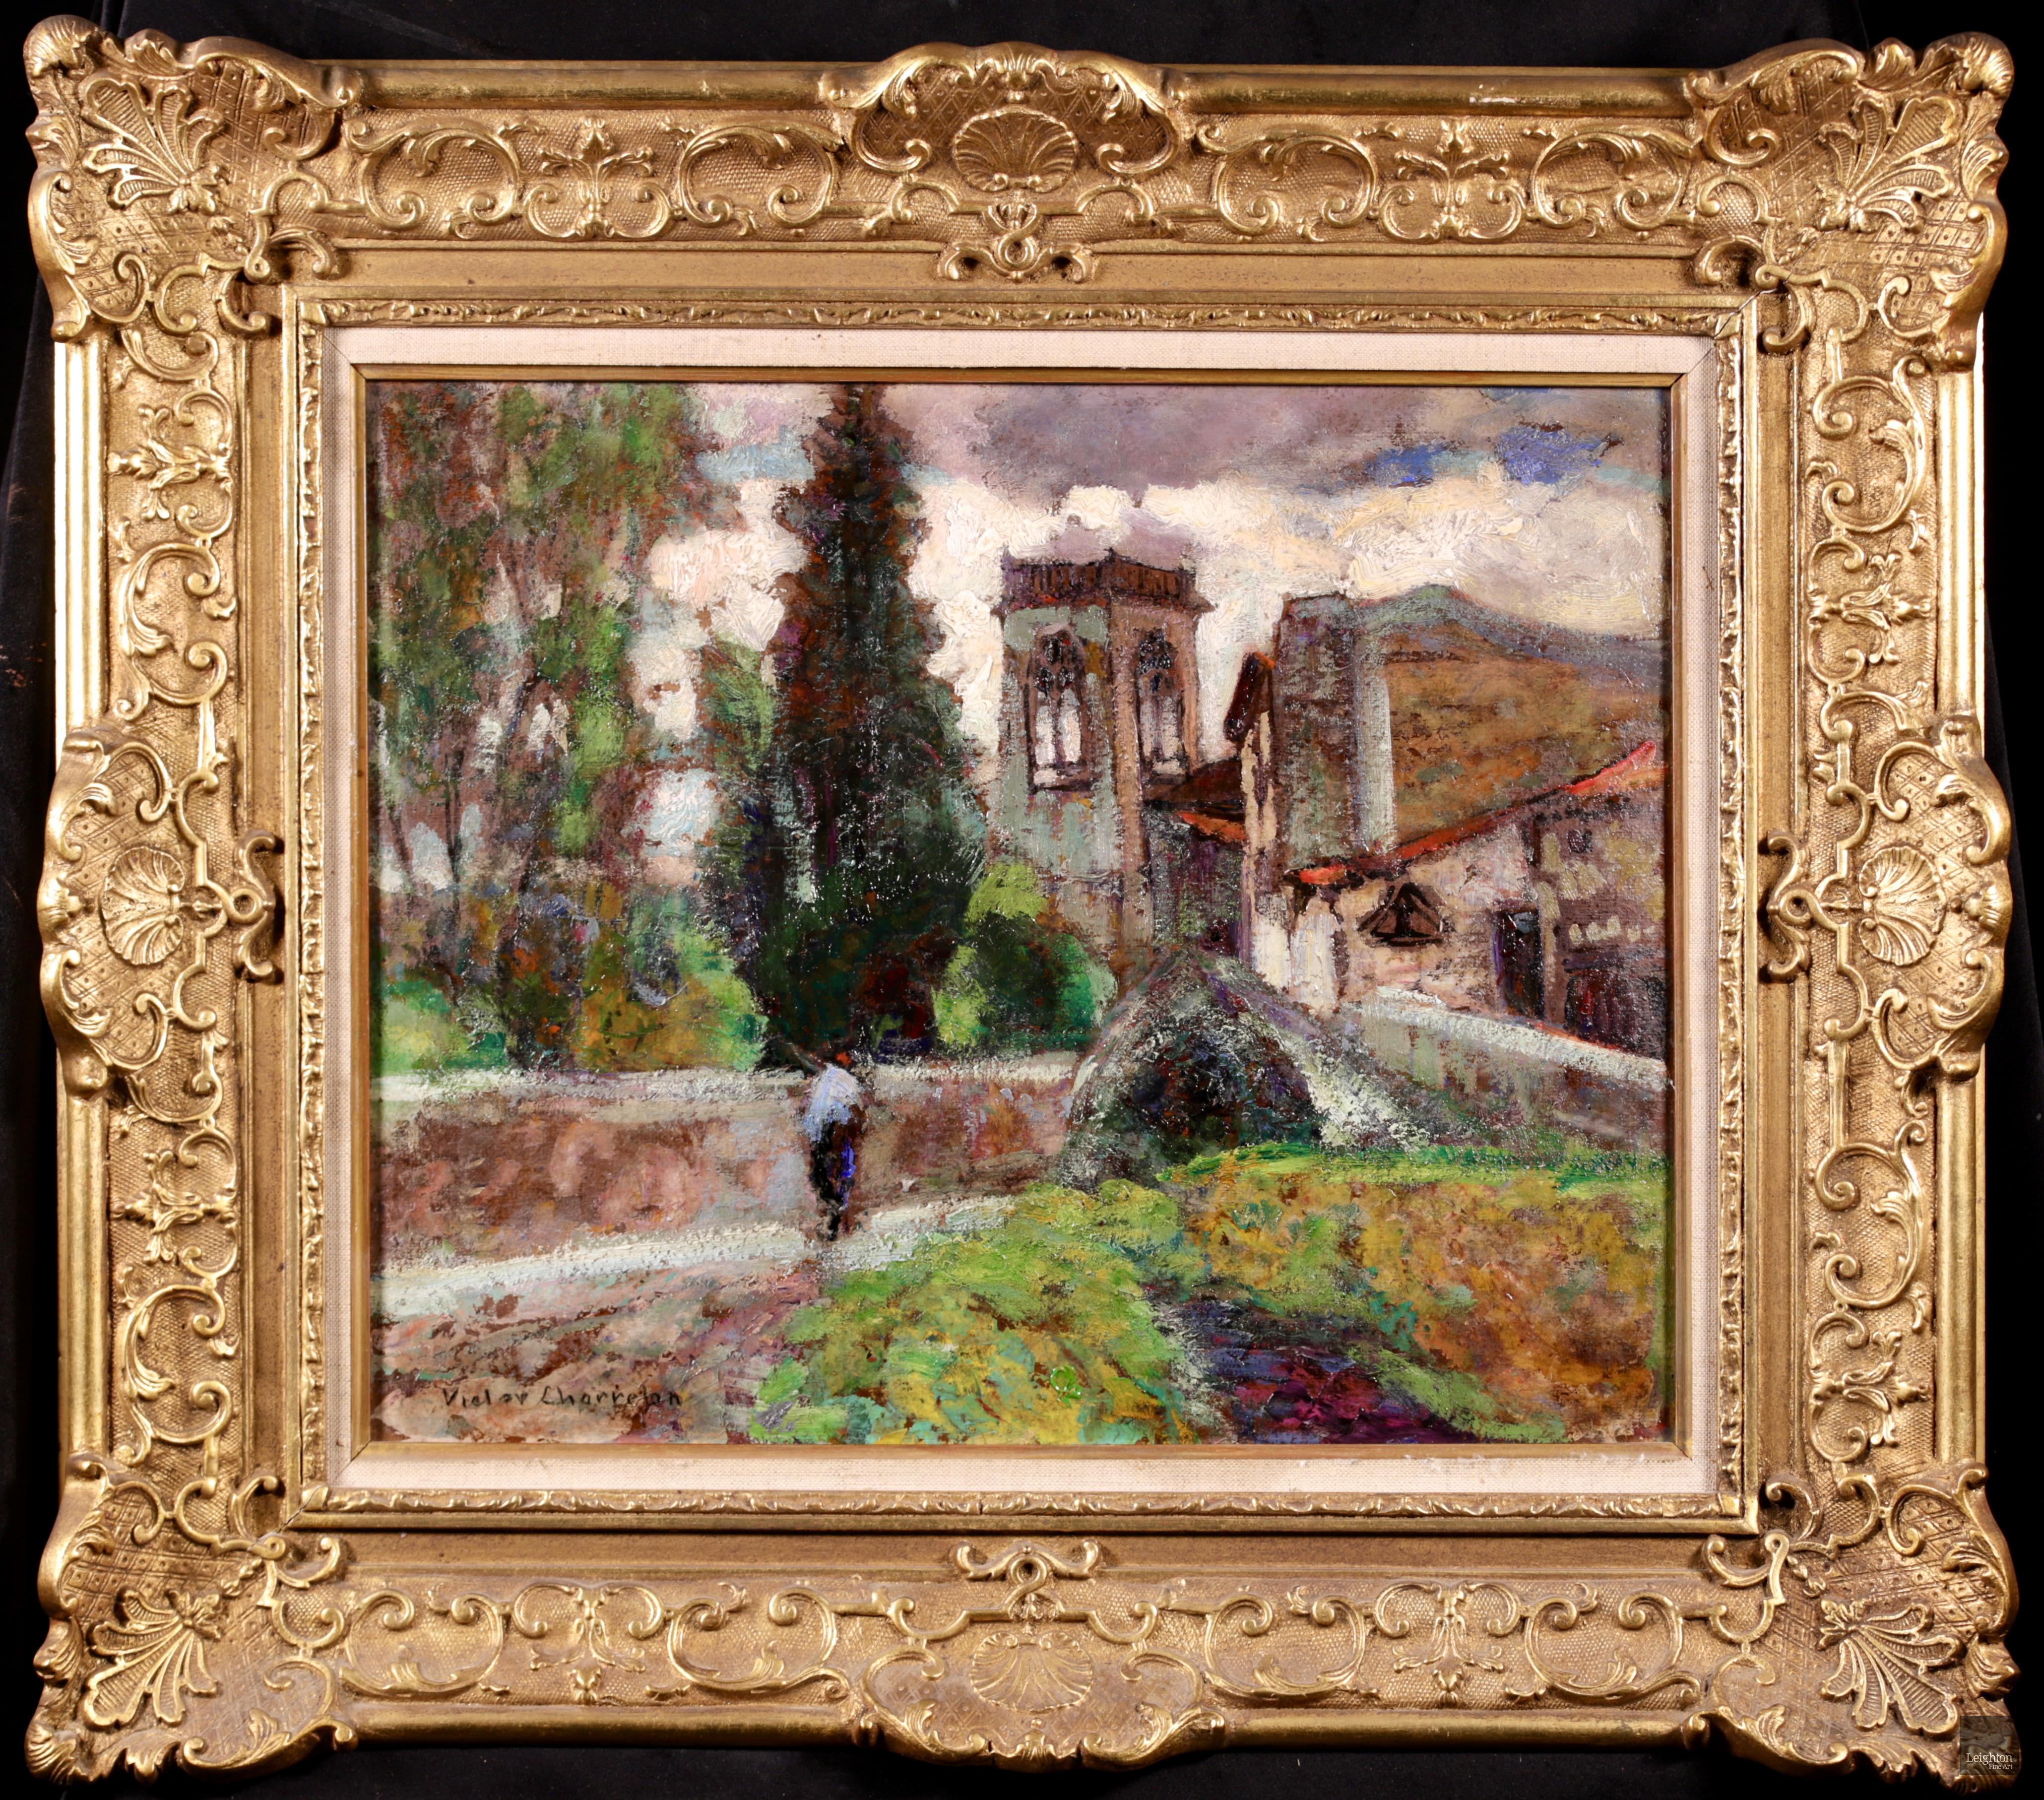 Stunning signed figure in landscape oil on board circa 1920 by sought after French Post-Impressionist painter Victor Charreton. The piece depicts a man walking up a hilly path past the buildings of a French village. The path is surrounded by walled